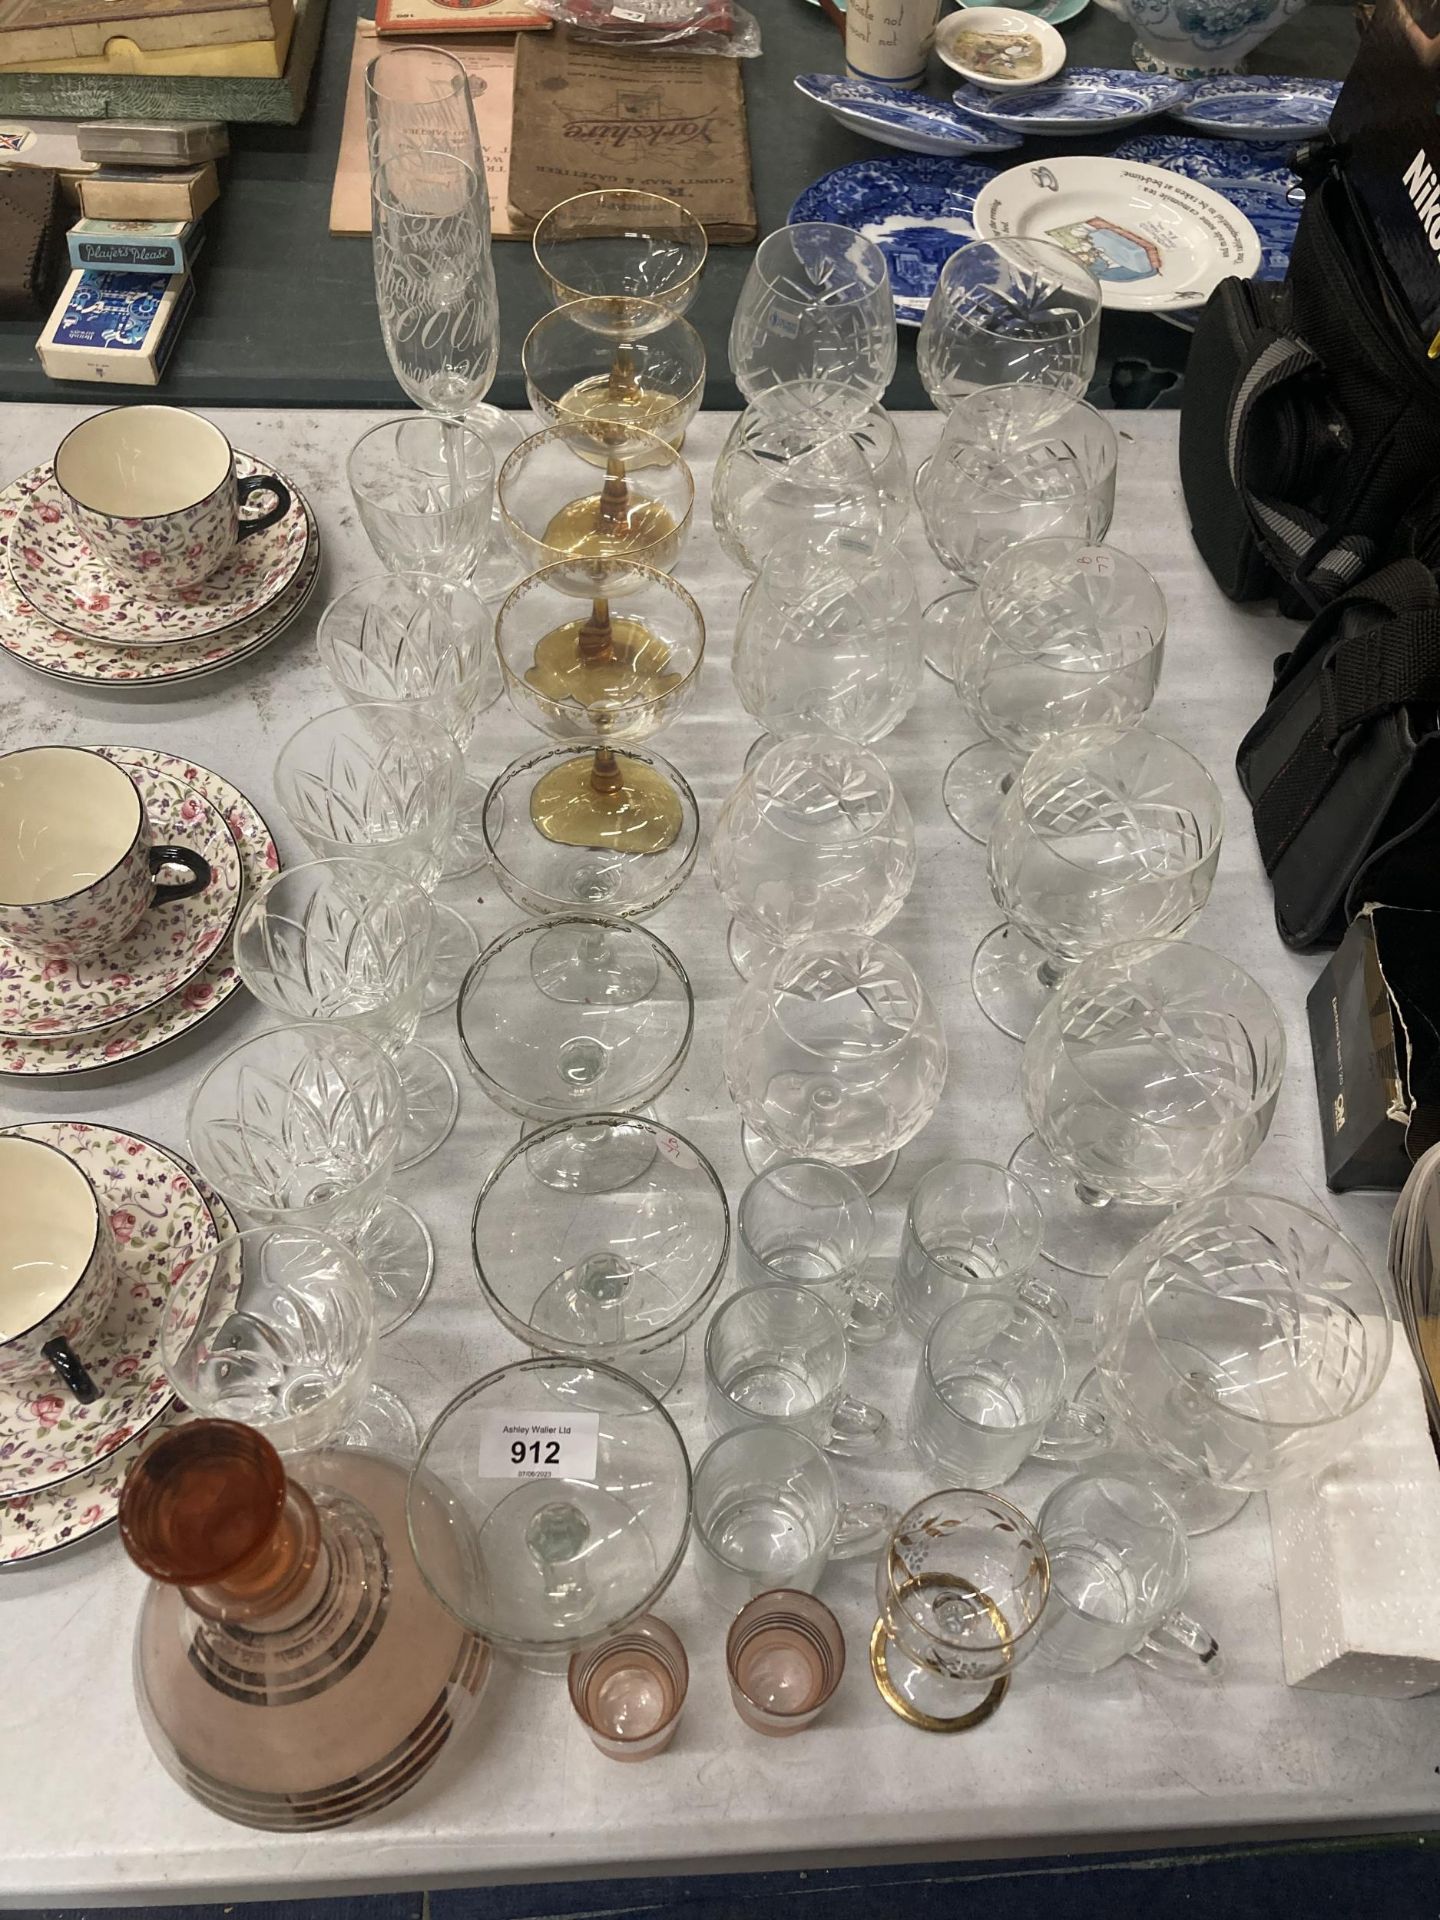 A LARGE QUANTITY OF GLASSES TO INCLUDE COCKTAIL, CHAMPAGNE FLUTES, WINE, BRANDY, A SMALL DECANTER